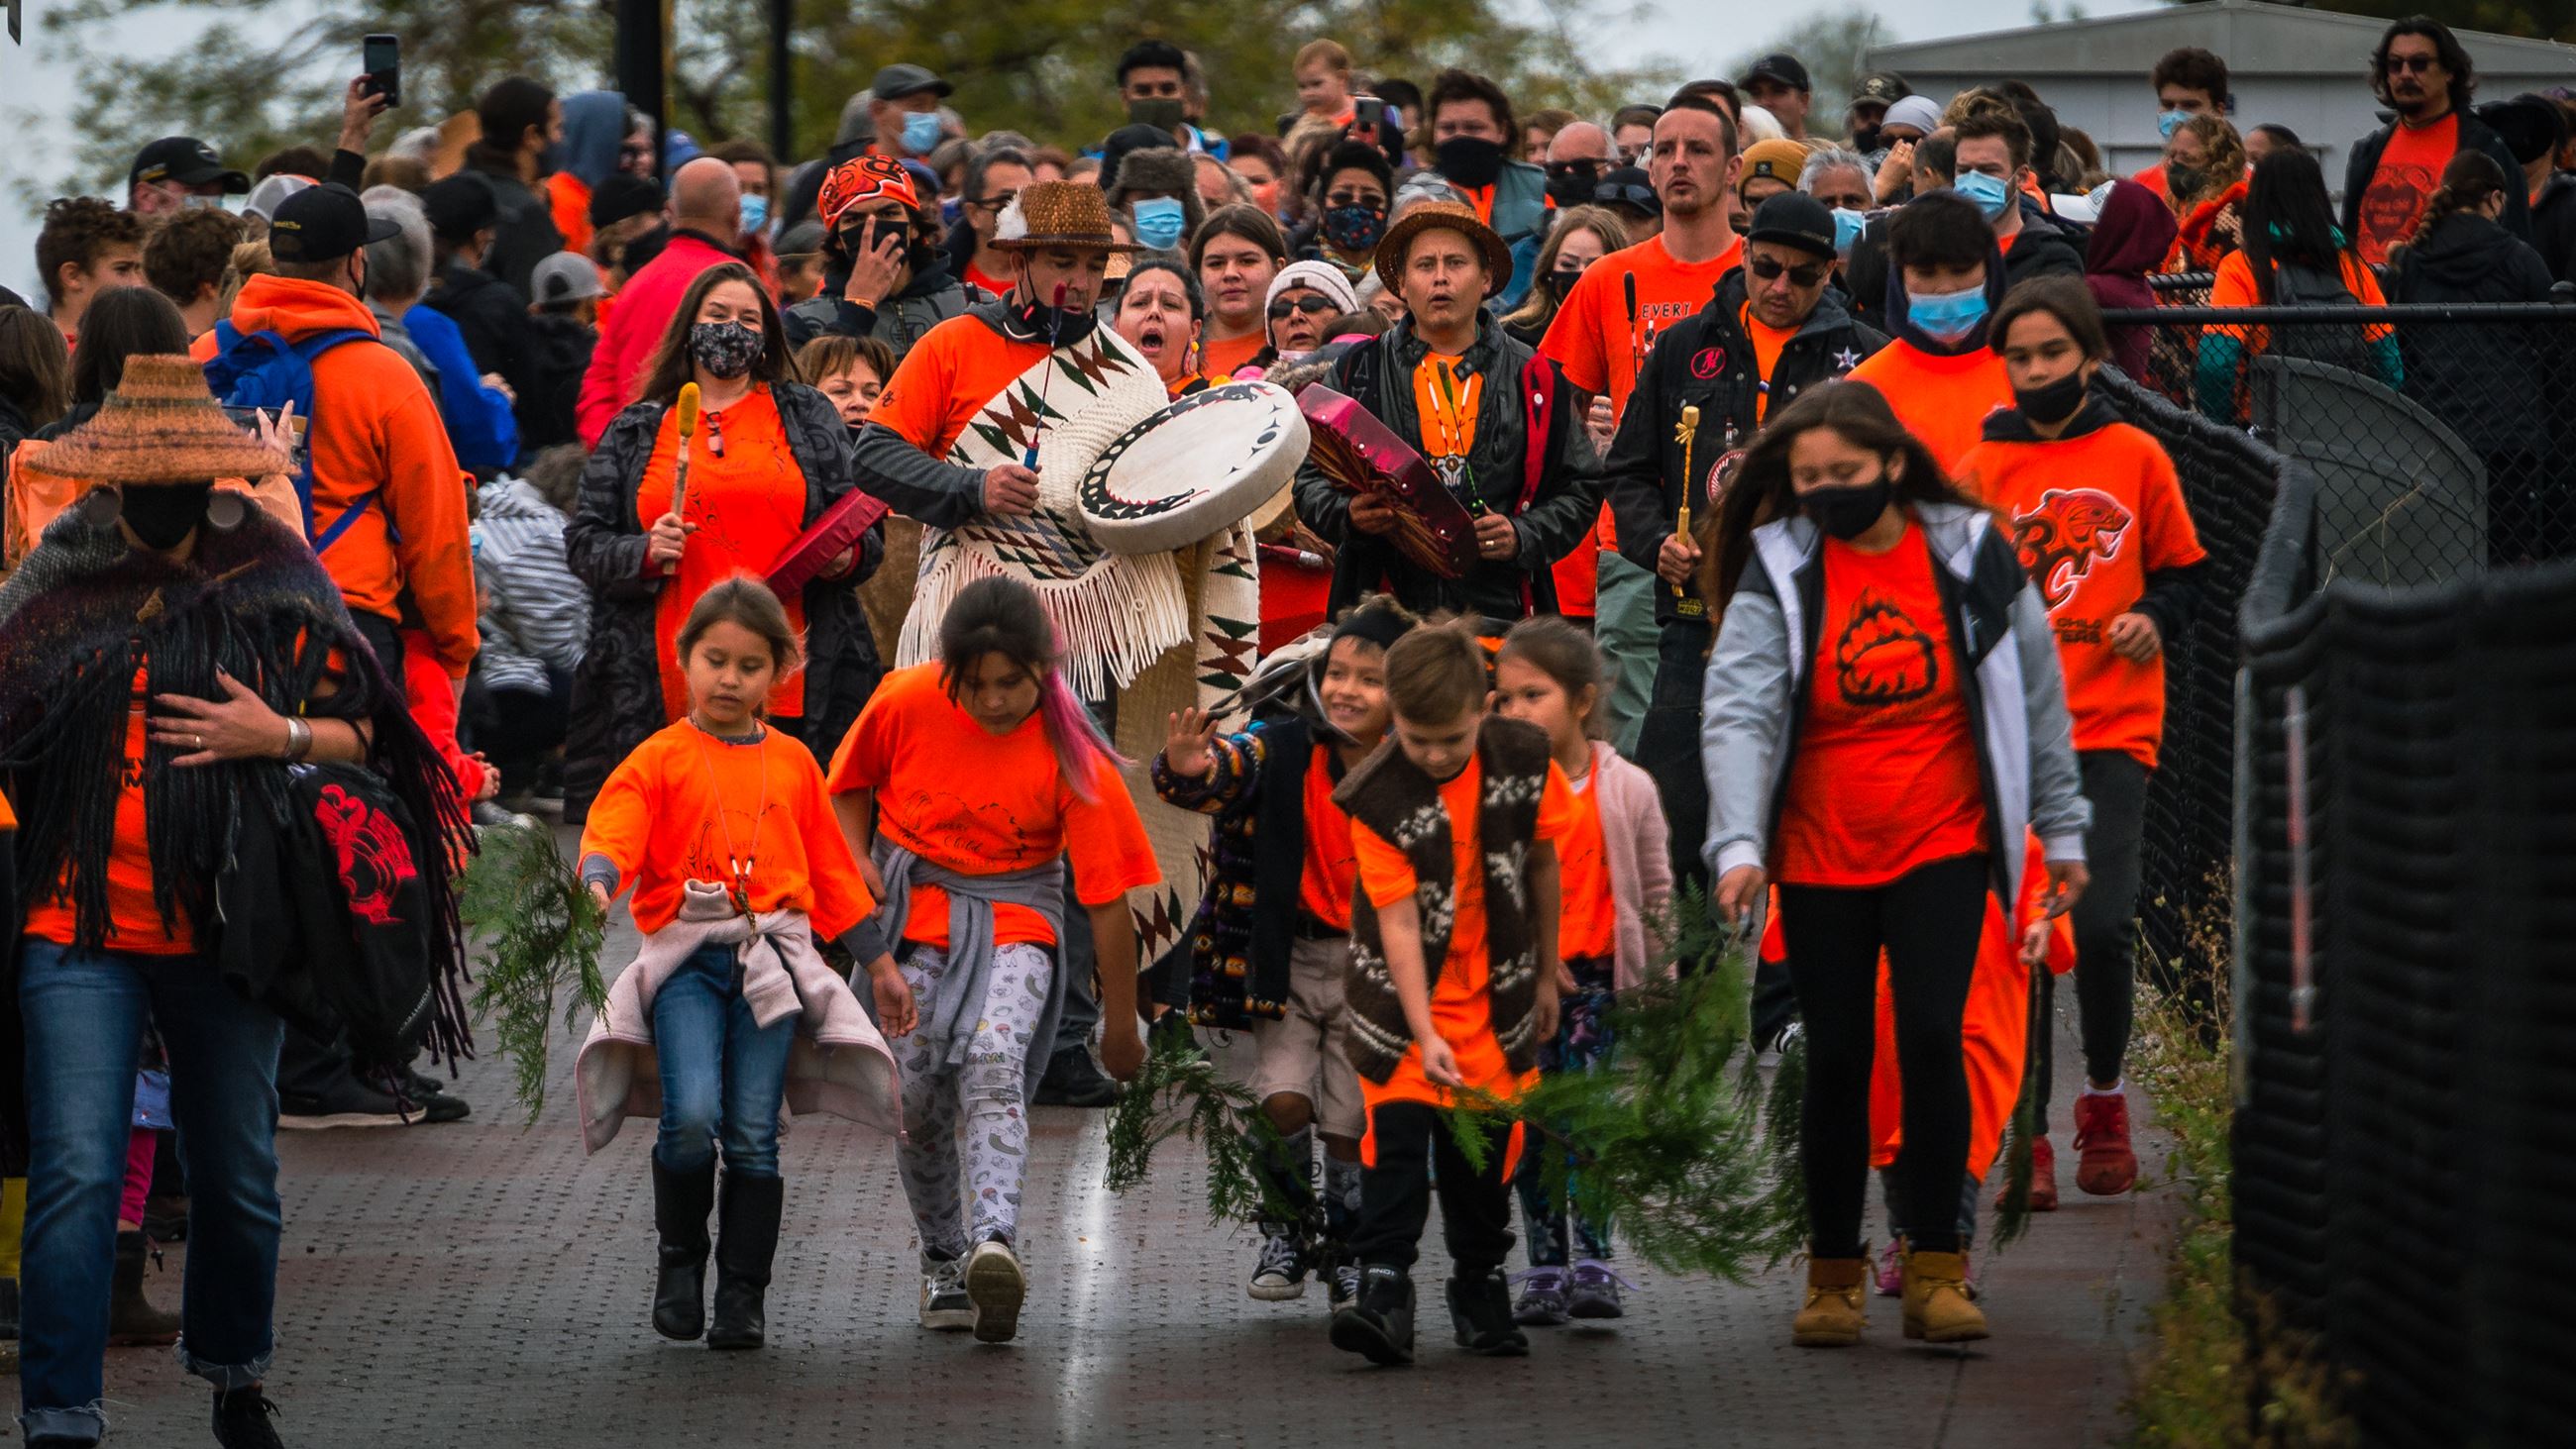 People walking together, wearing orange, led by members of Semiahmoo First Nation